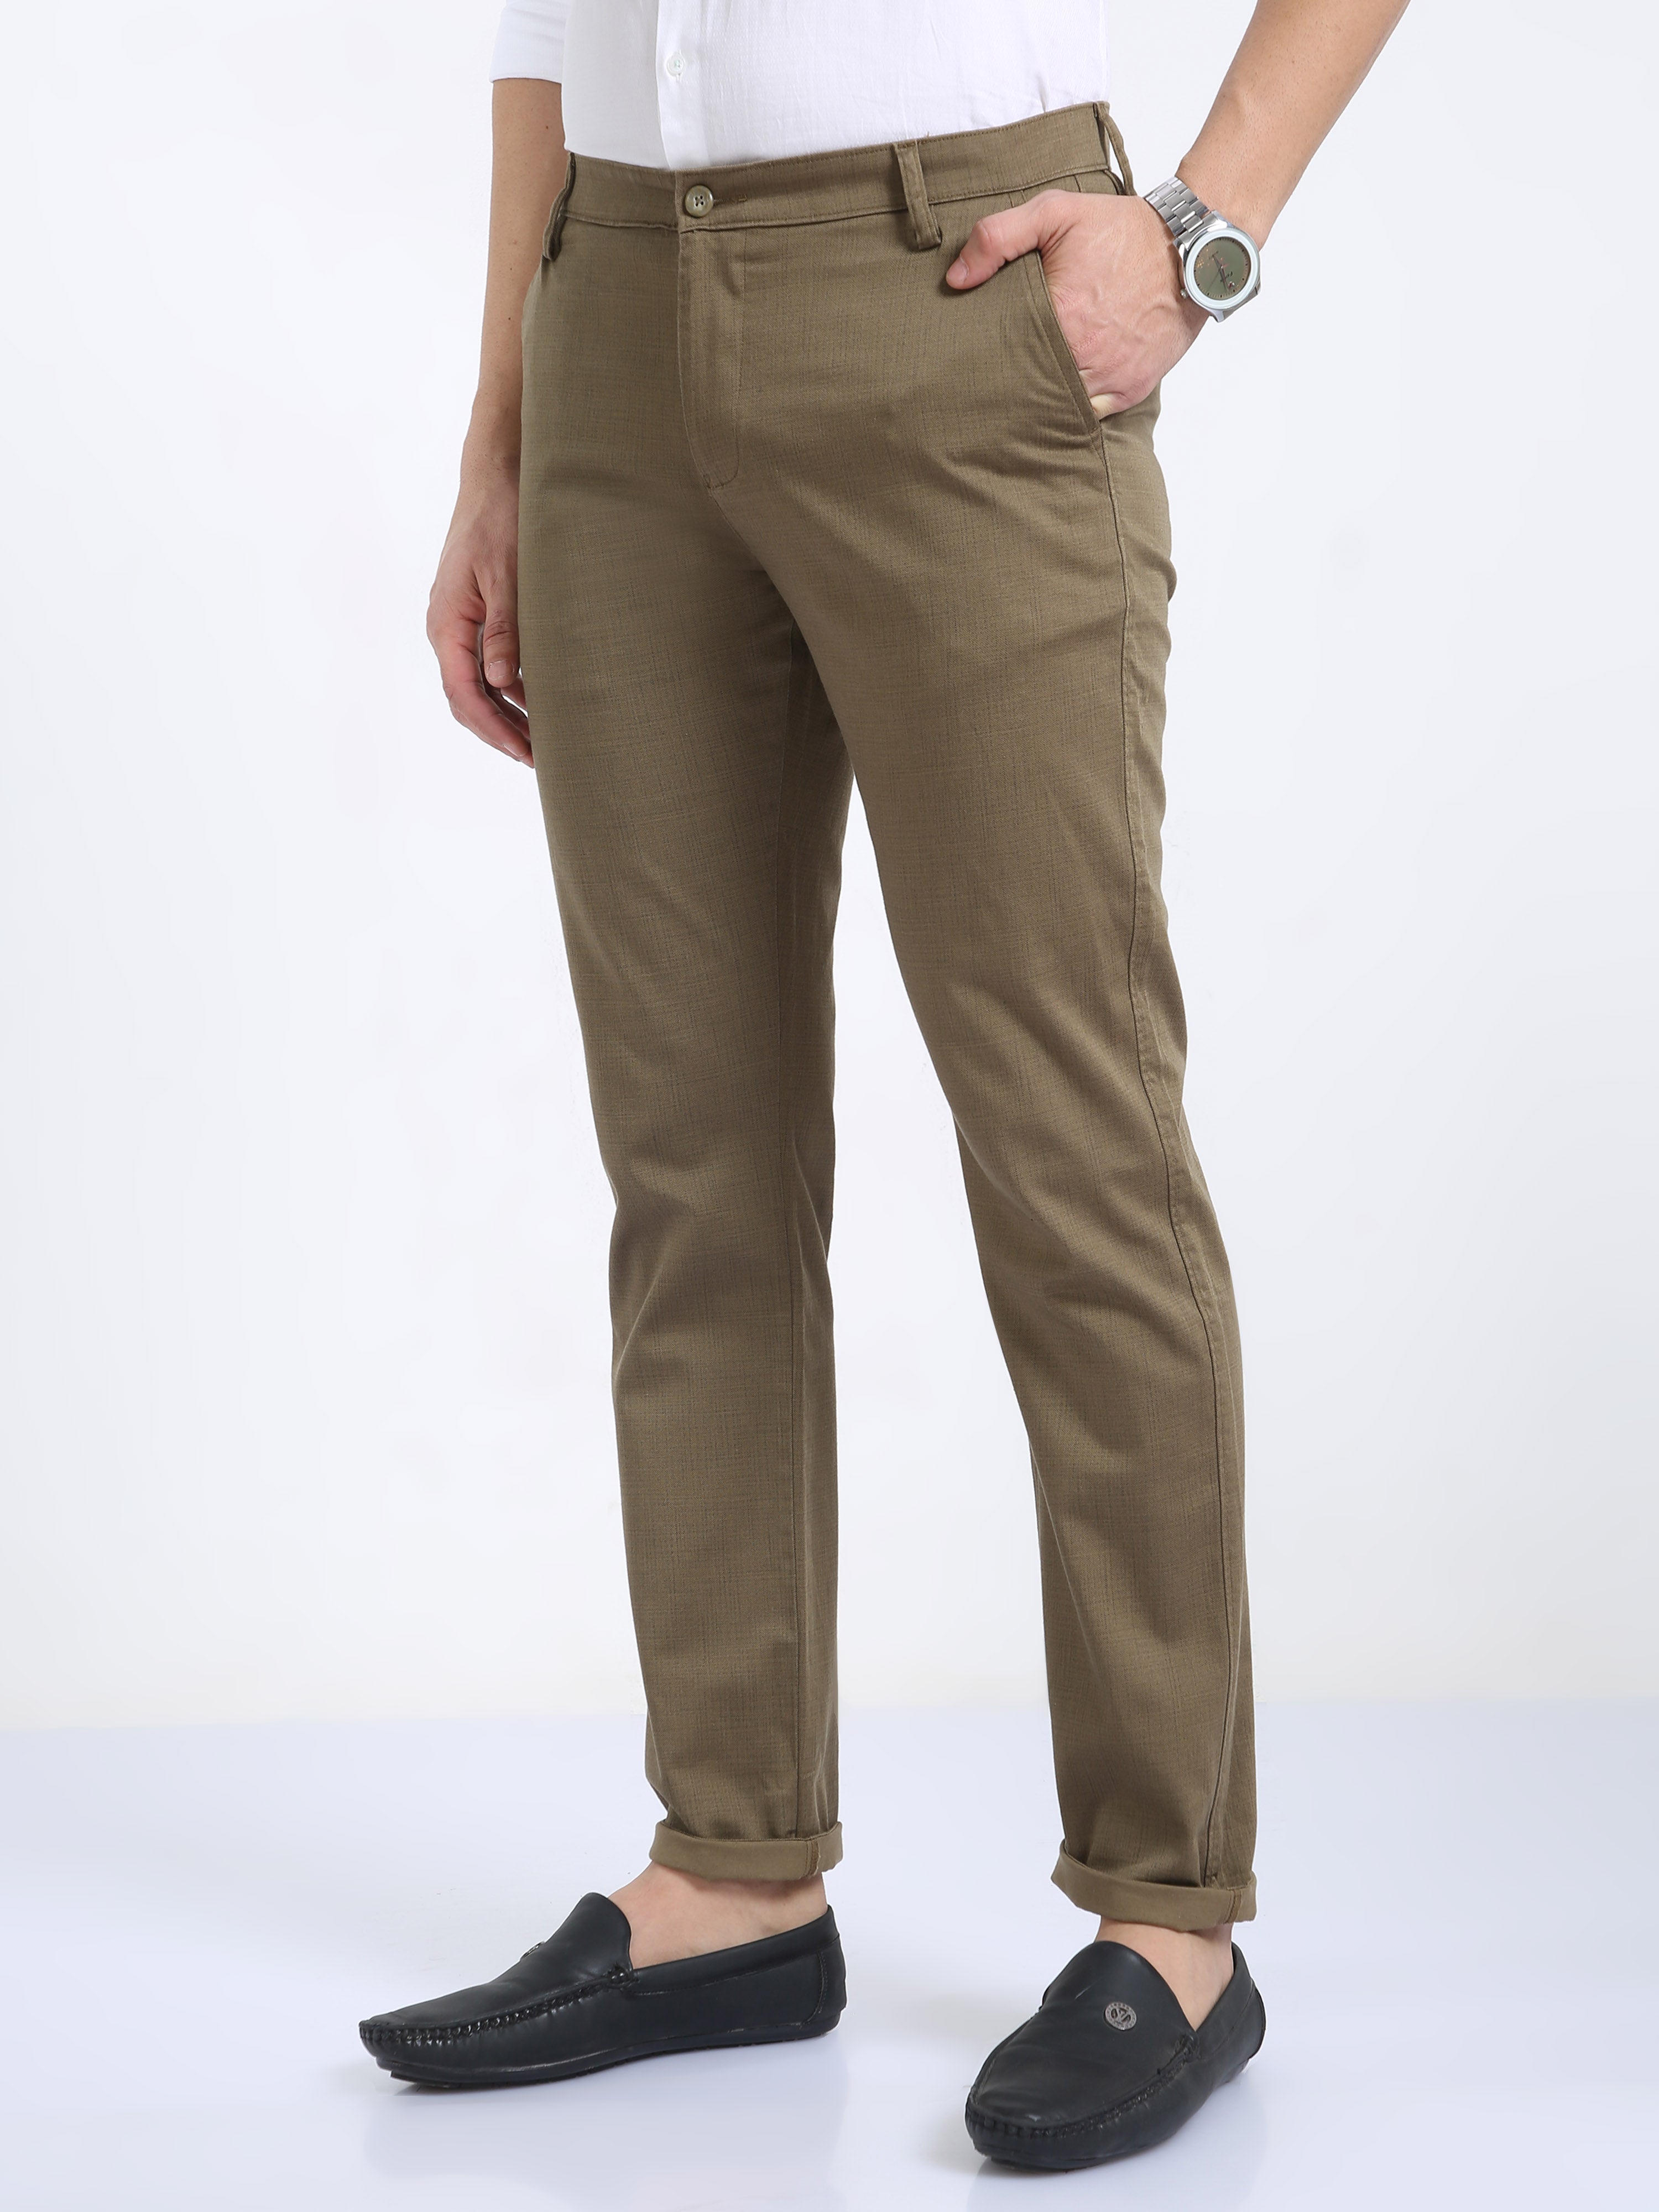 CP BRO Mens Moderate Fit Solid Dark Khakhi Color Trousers | To2-09 C-Pis-Mf-Ly